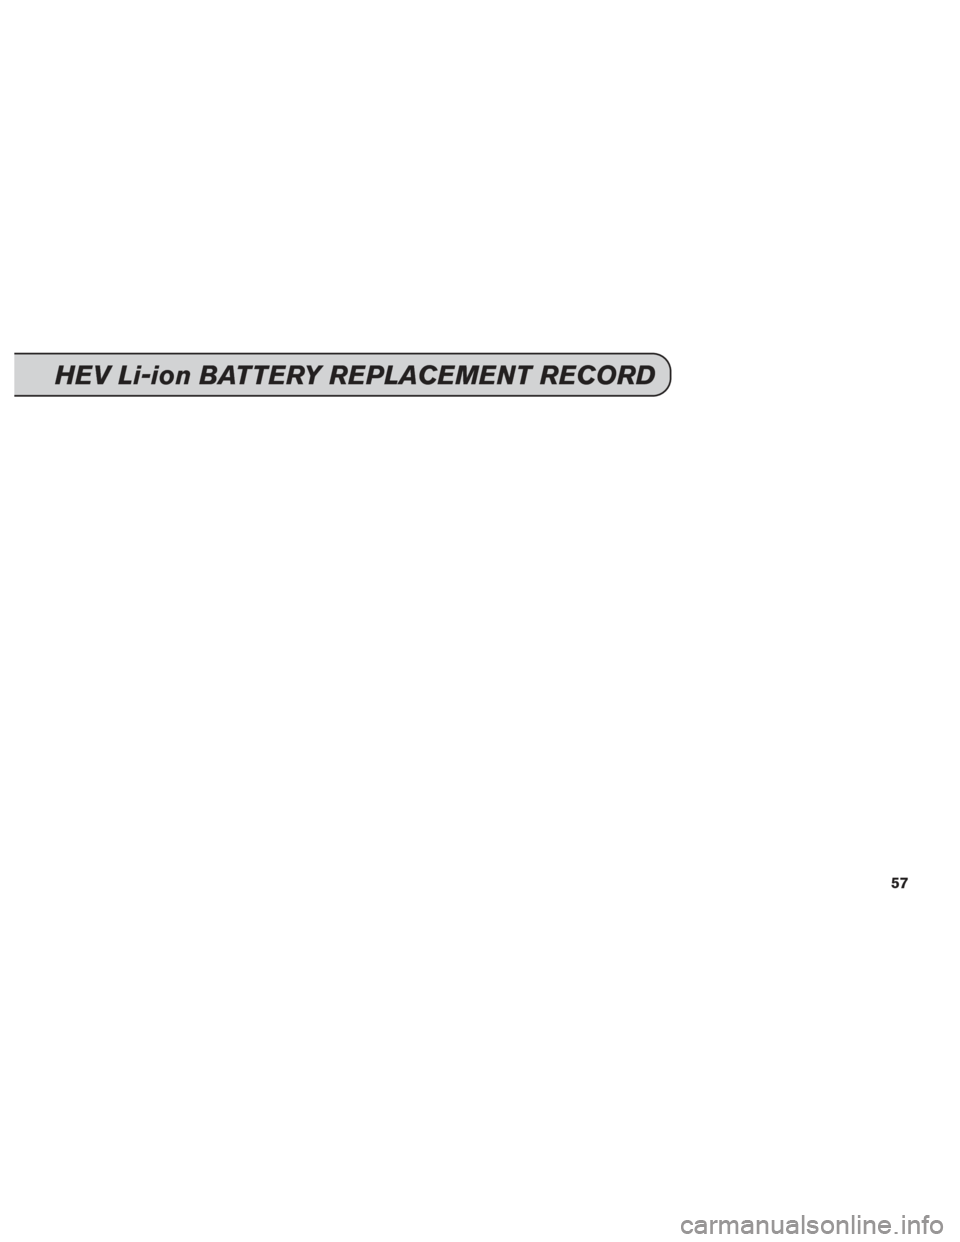 NISSAN 370Z ROADSTER 2014 Z34 Service And Maintenance Guide HEV Li-ion BATTERY REPLACEMENT RECORD
57 